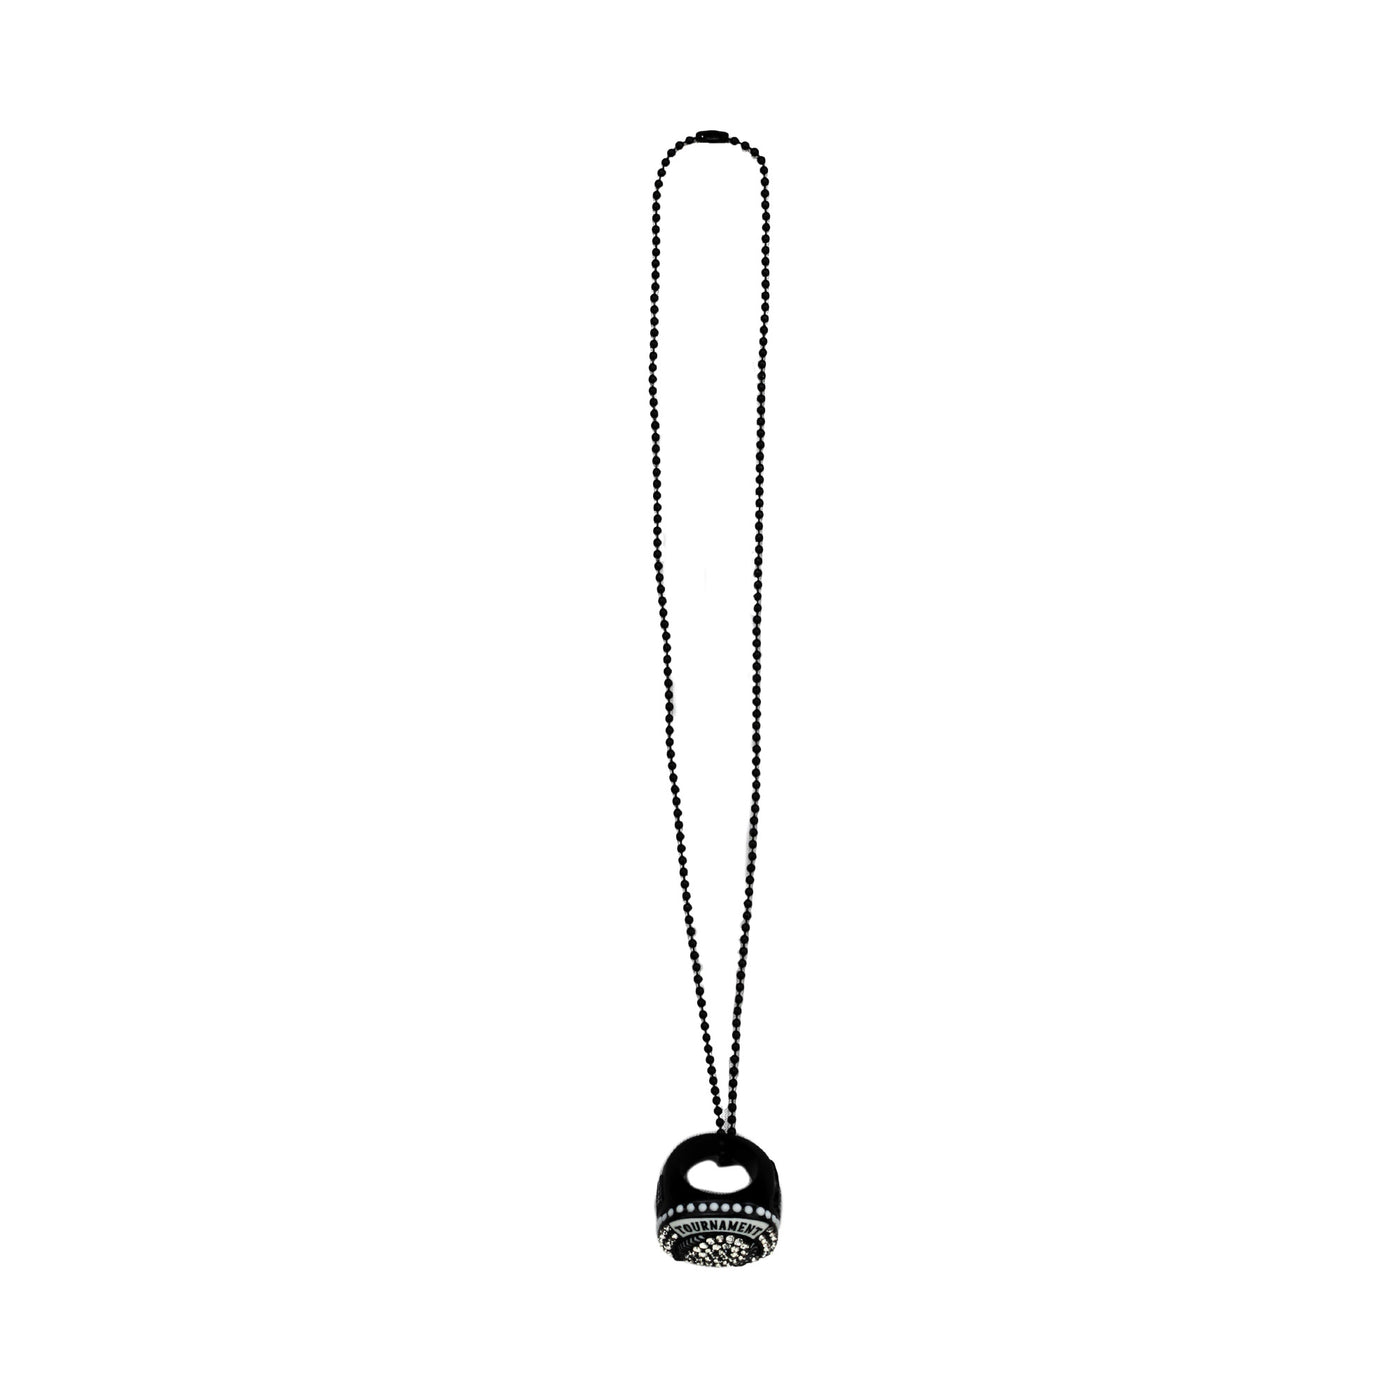 Black Ball Chain Necklaces (15 CHAINS IN 1 BAG)